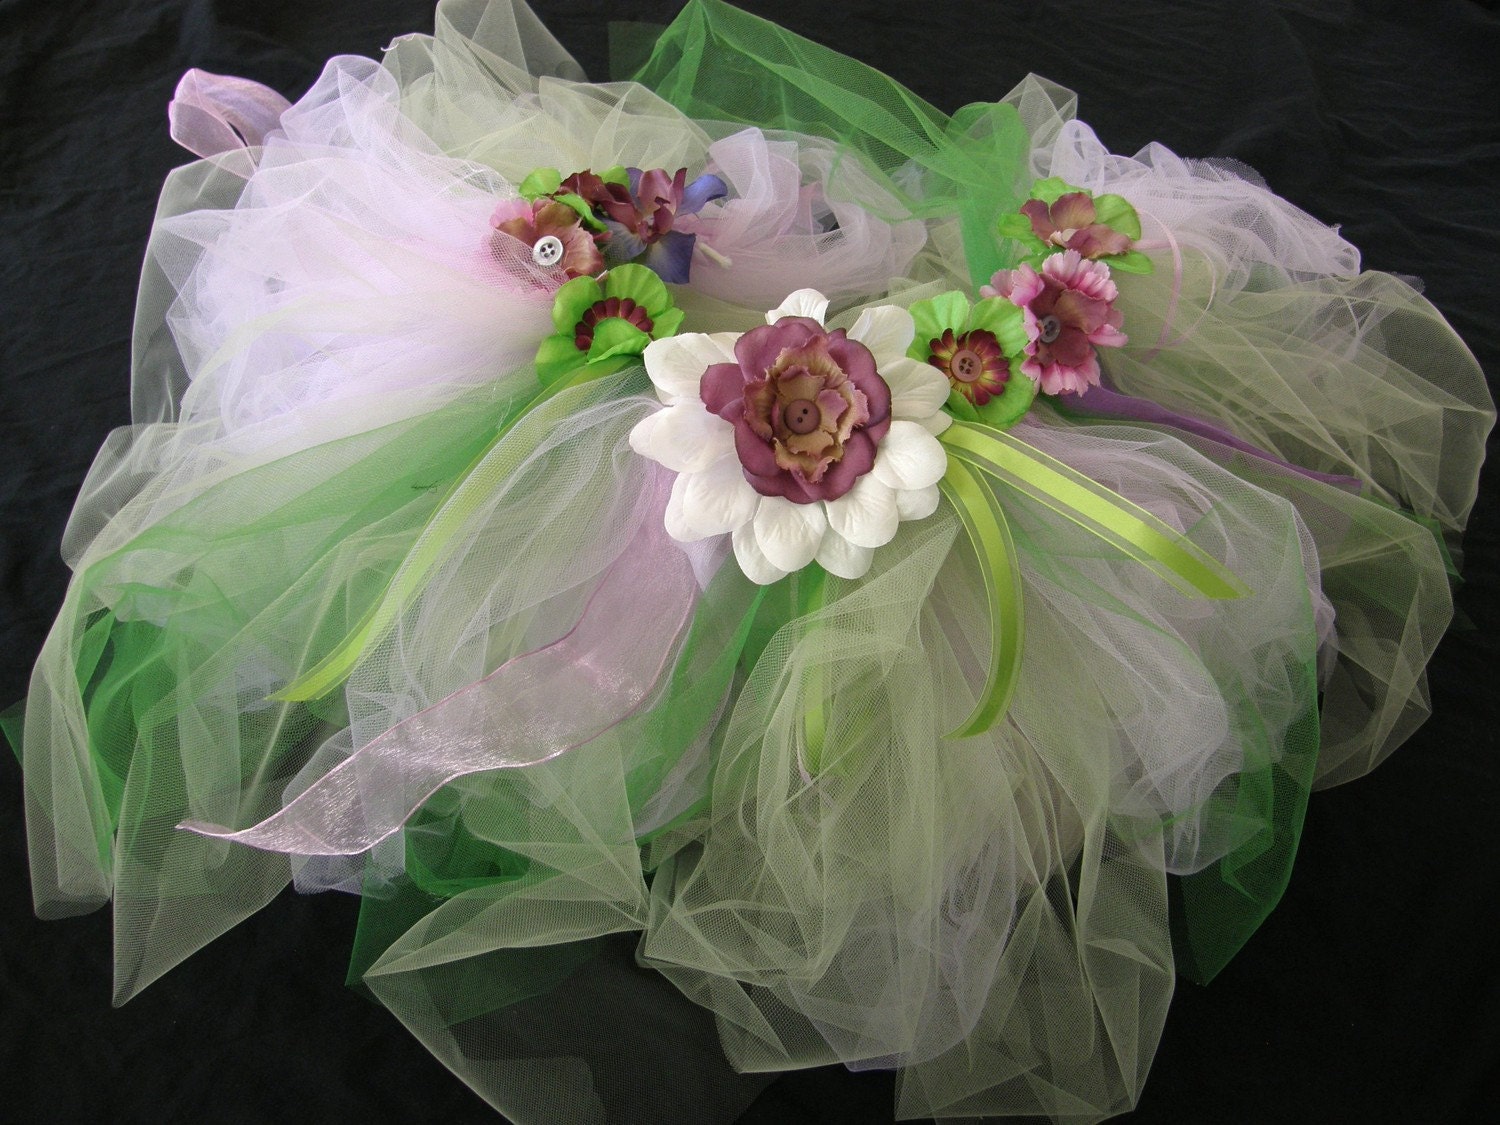 Unique and one of a kind - Fairy, princess, or butterfly purple and lime green tutu fits baby or girl- sizes available 12 months to size 6 - every little girls dream